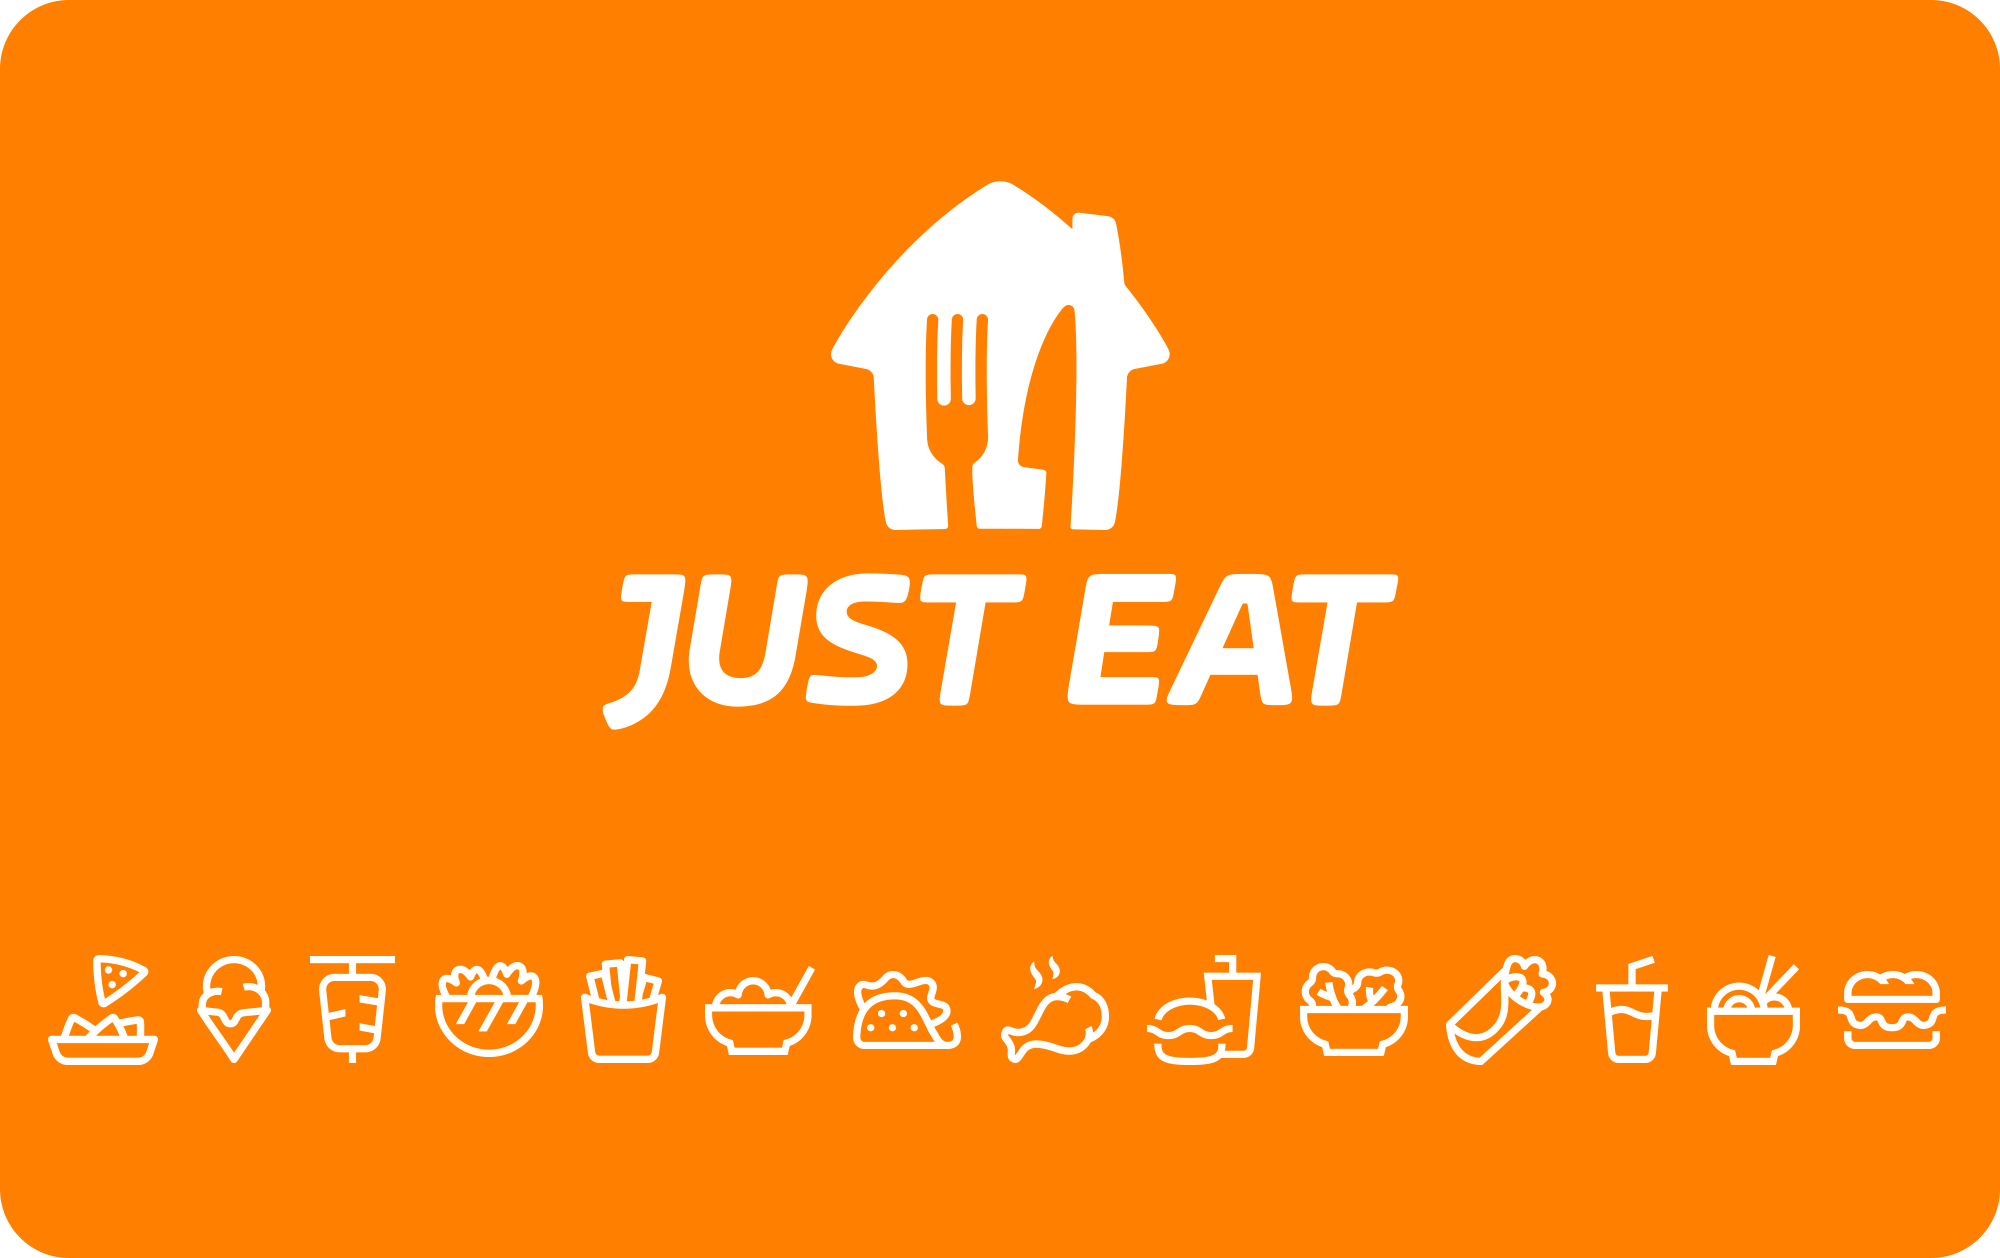 Just Eat £80 Gift Card UK